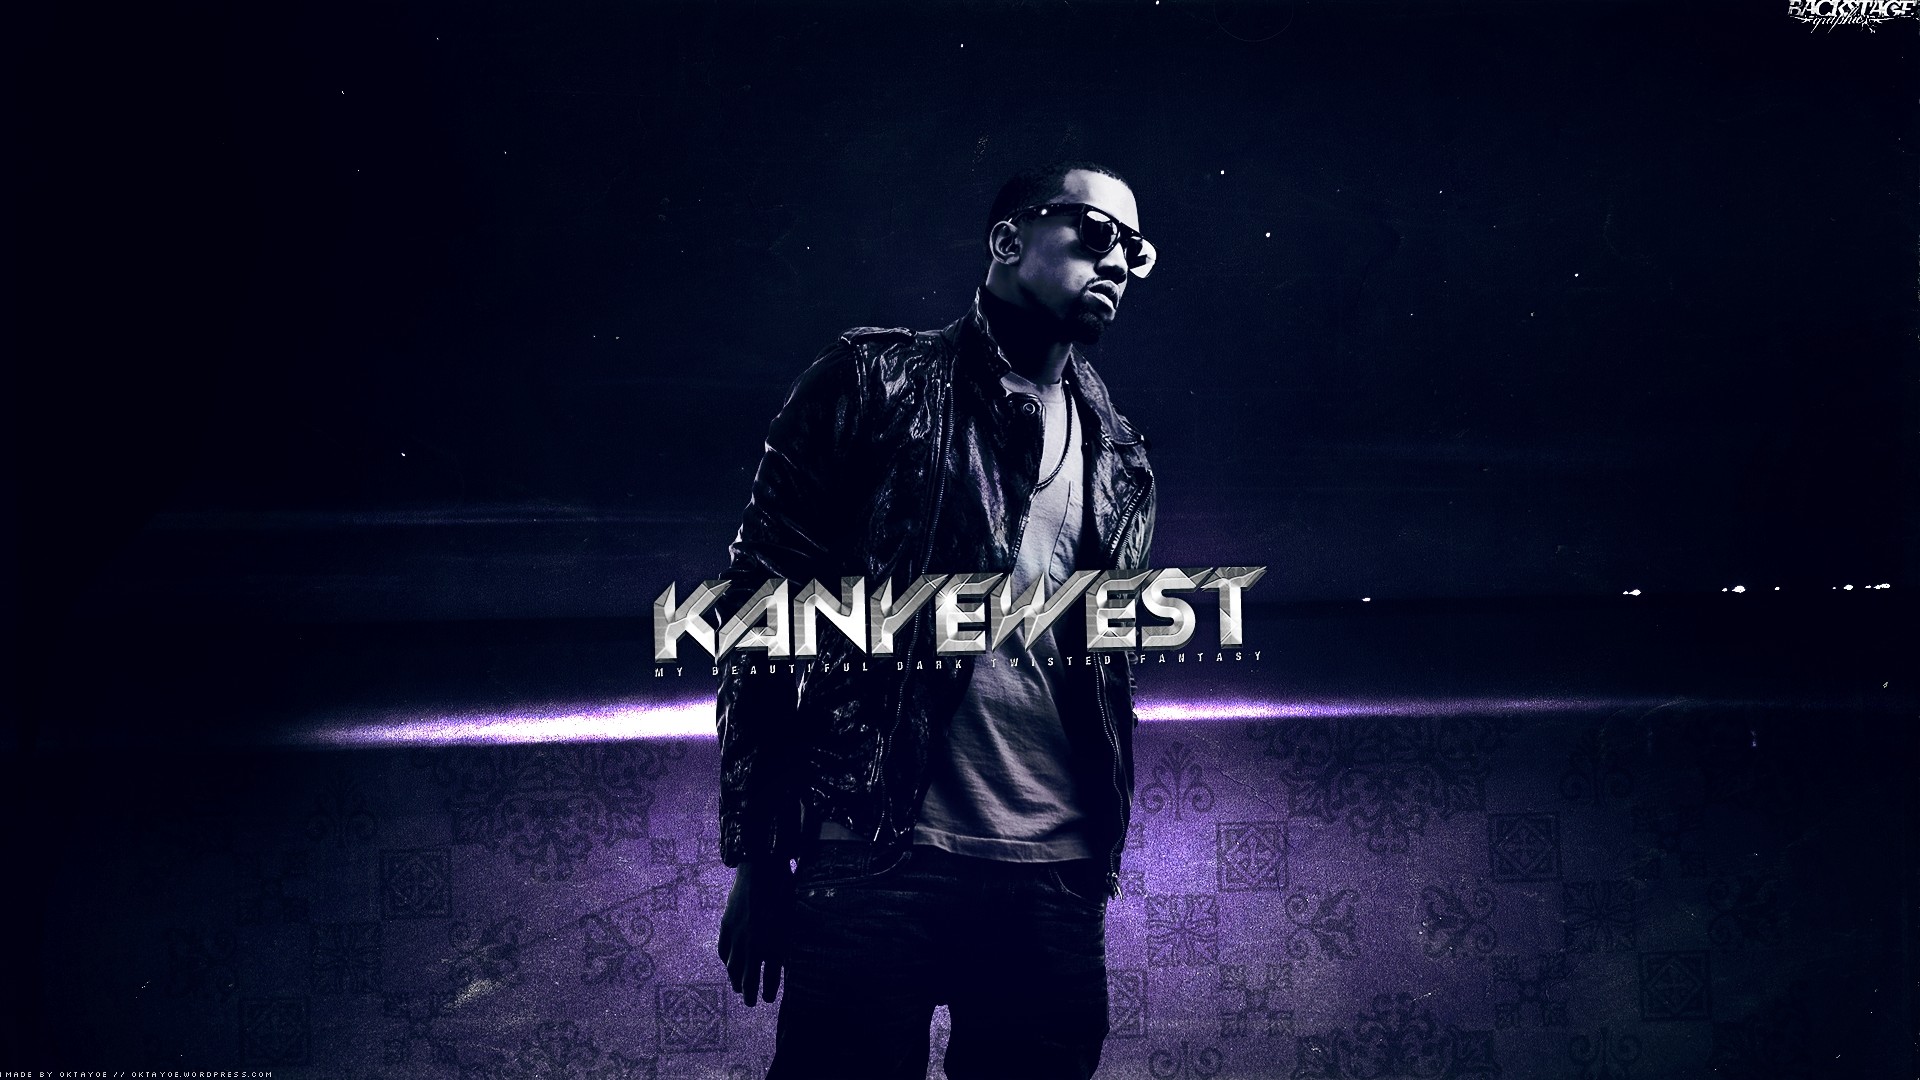 1920x1080 ... Celeb Wallpaper HD - Kanye West Power Wallpapers 1080p at .